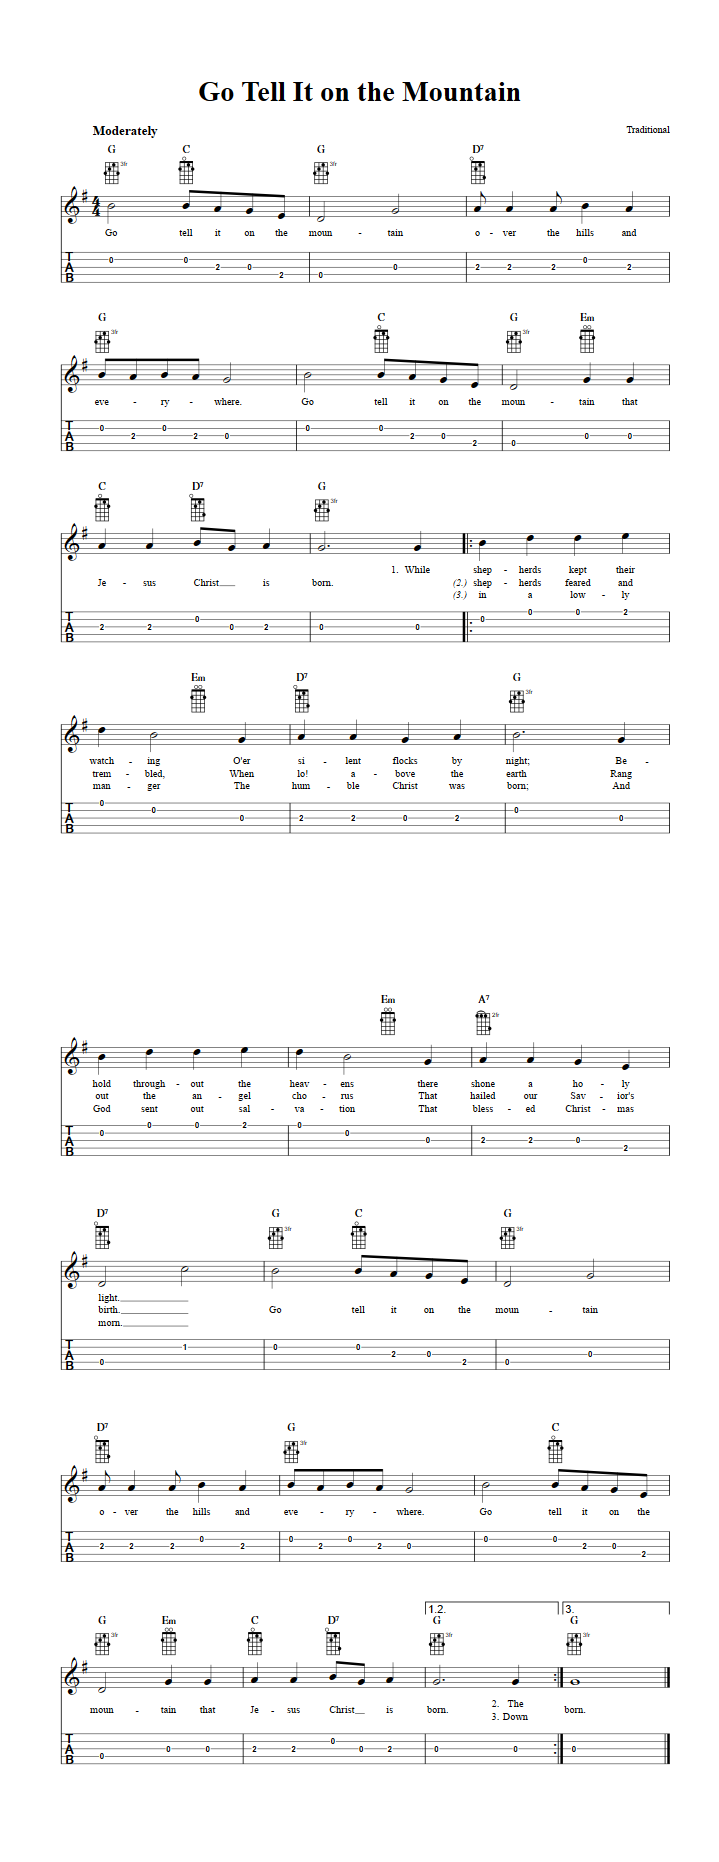 Go Tell It on the Mountain: Chords, Sheet Music, and Tab for Banjo with Lyrics